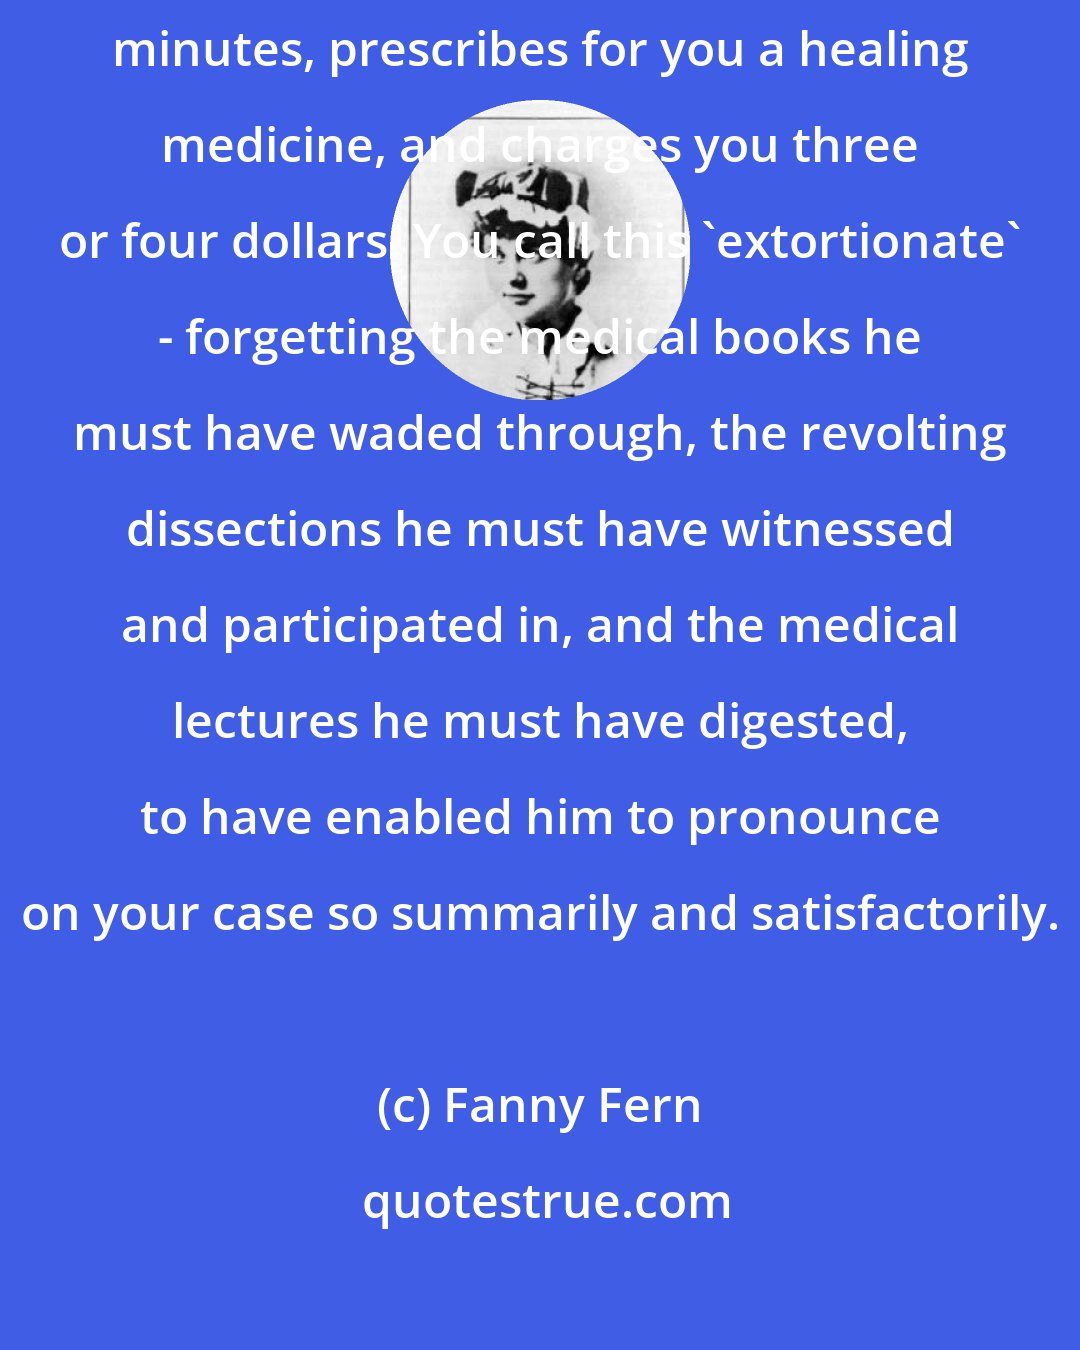 Fanny Fern: You are taken sick; you send for a physician; he comes in, stays ten minutes, prescribes for you a healing medicine, and charges you three or four dollars. You call this 'extortionate' - forgetting the medical books he must have waded through, the revolting dissections he must have witnessed and participated in, and the medical lectures he must have digested, to have enabled him to pronounce on your case so summarily and satisfactorily.